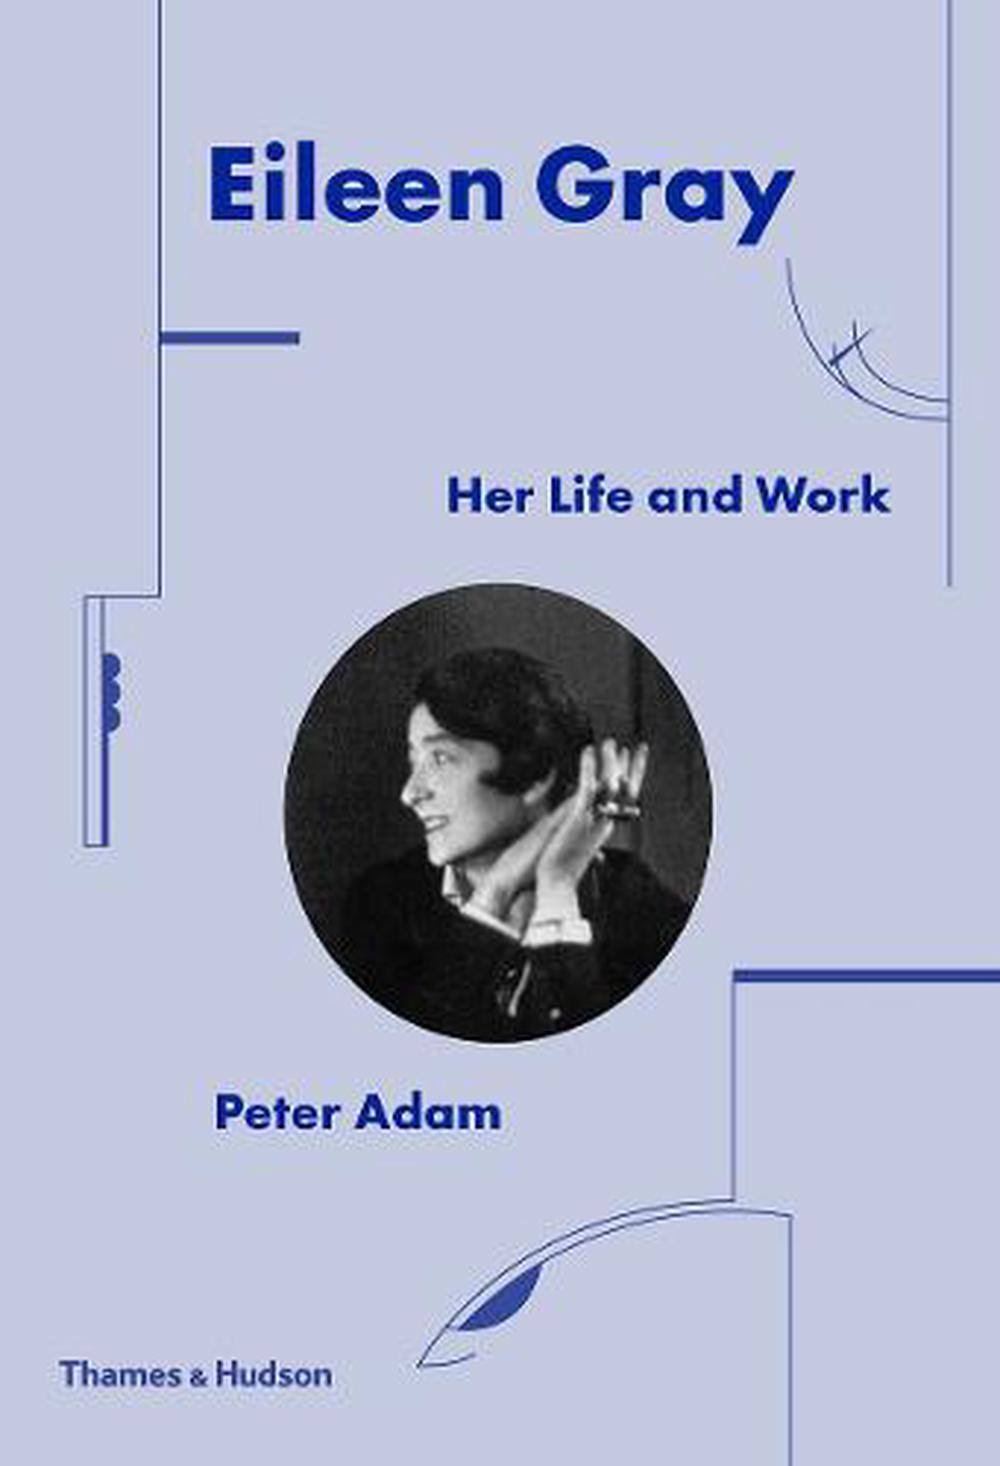 Eileen Gray: Her Life and Work [Book]